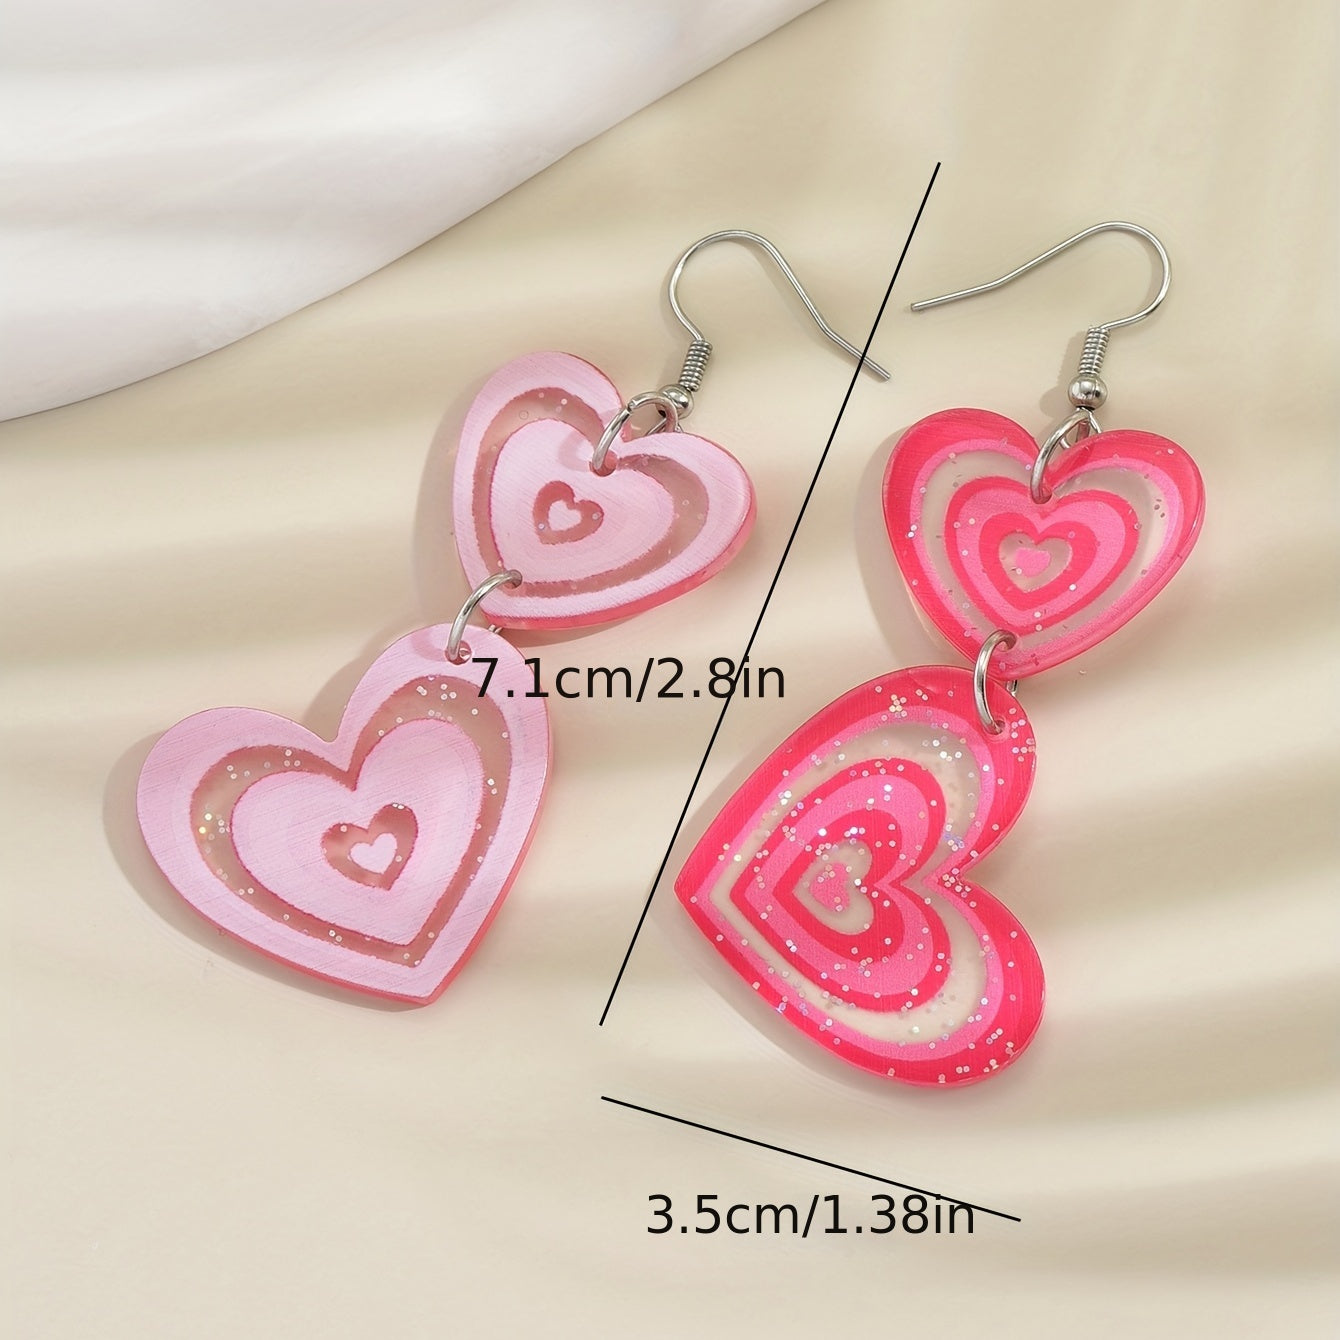 Add a Touch of Y2K Style to Your Look with Lovely Heart Shaped Drop Dangle Earrings - Available in Two Sparkling Colors!